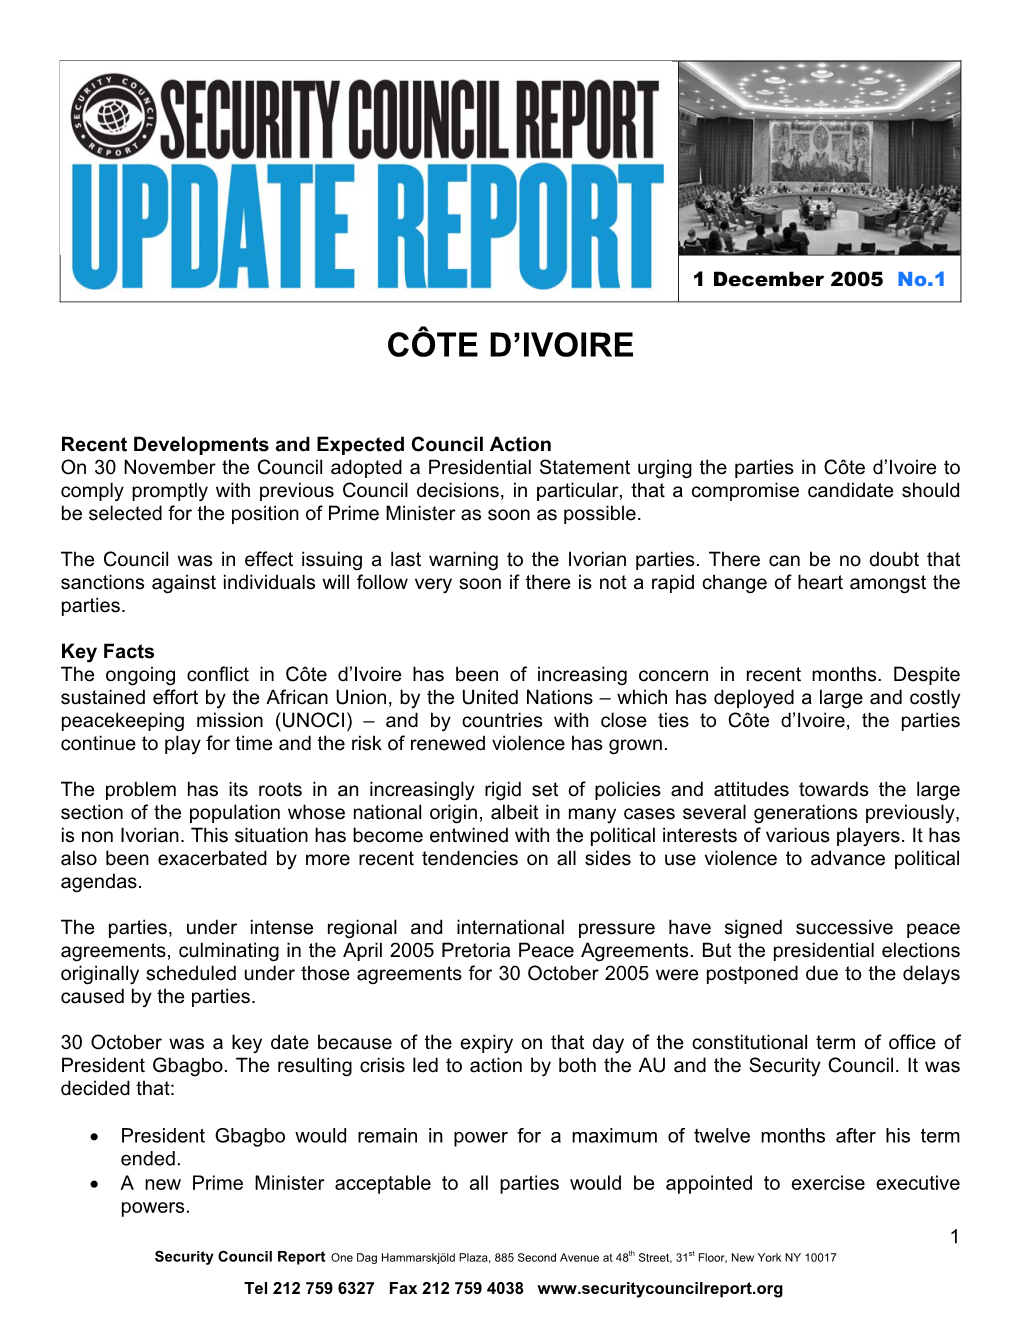 Côte D'ivoire (UNOCI) by $51.28 Million, in Addition to $386.89 Million Already Approved for the 1 July 2005 to 30 June 2006 Period